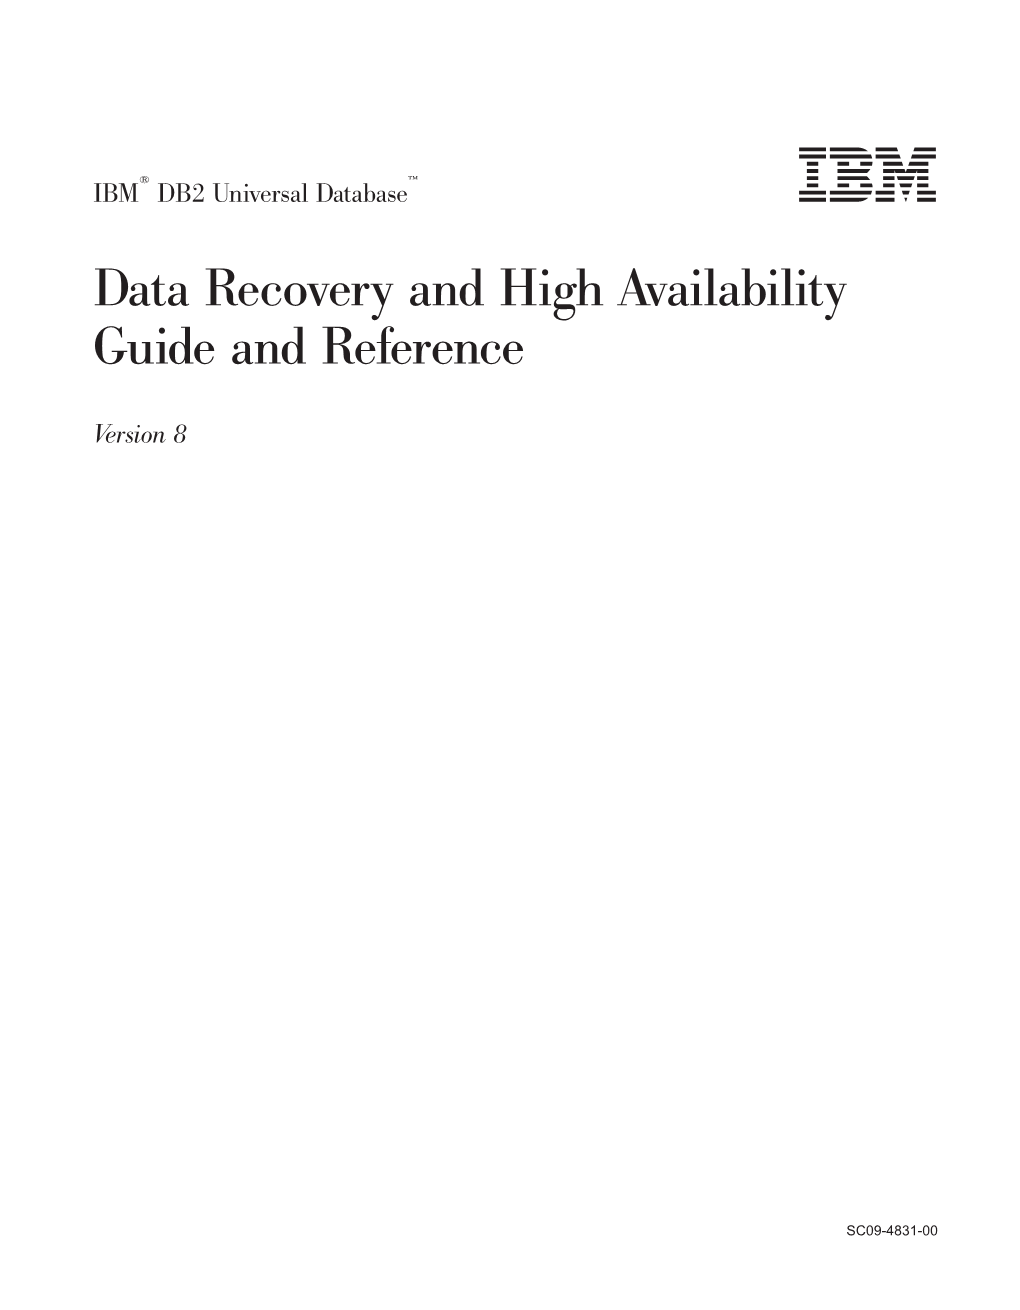 Data Recovery and High Availability Guide and Reference